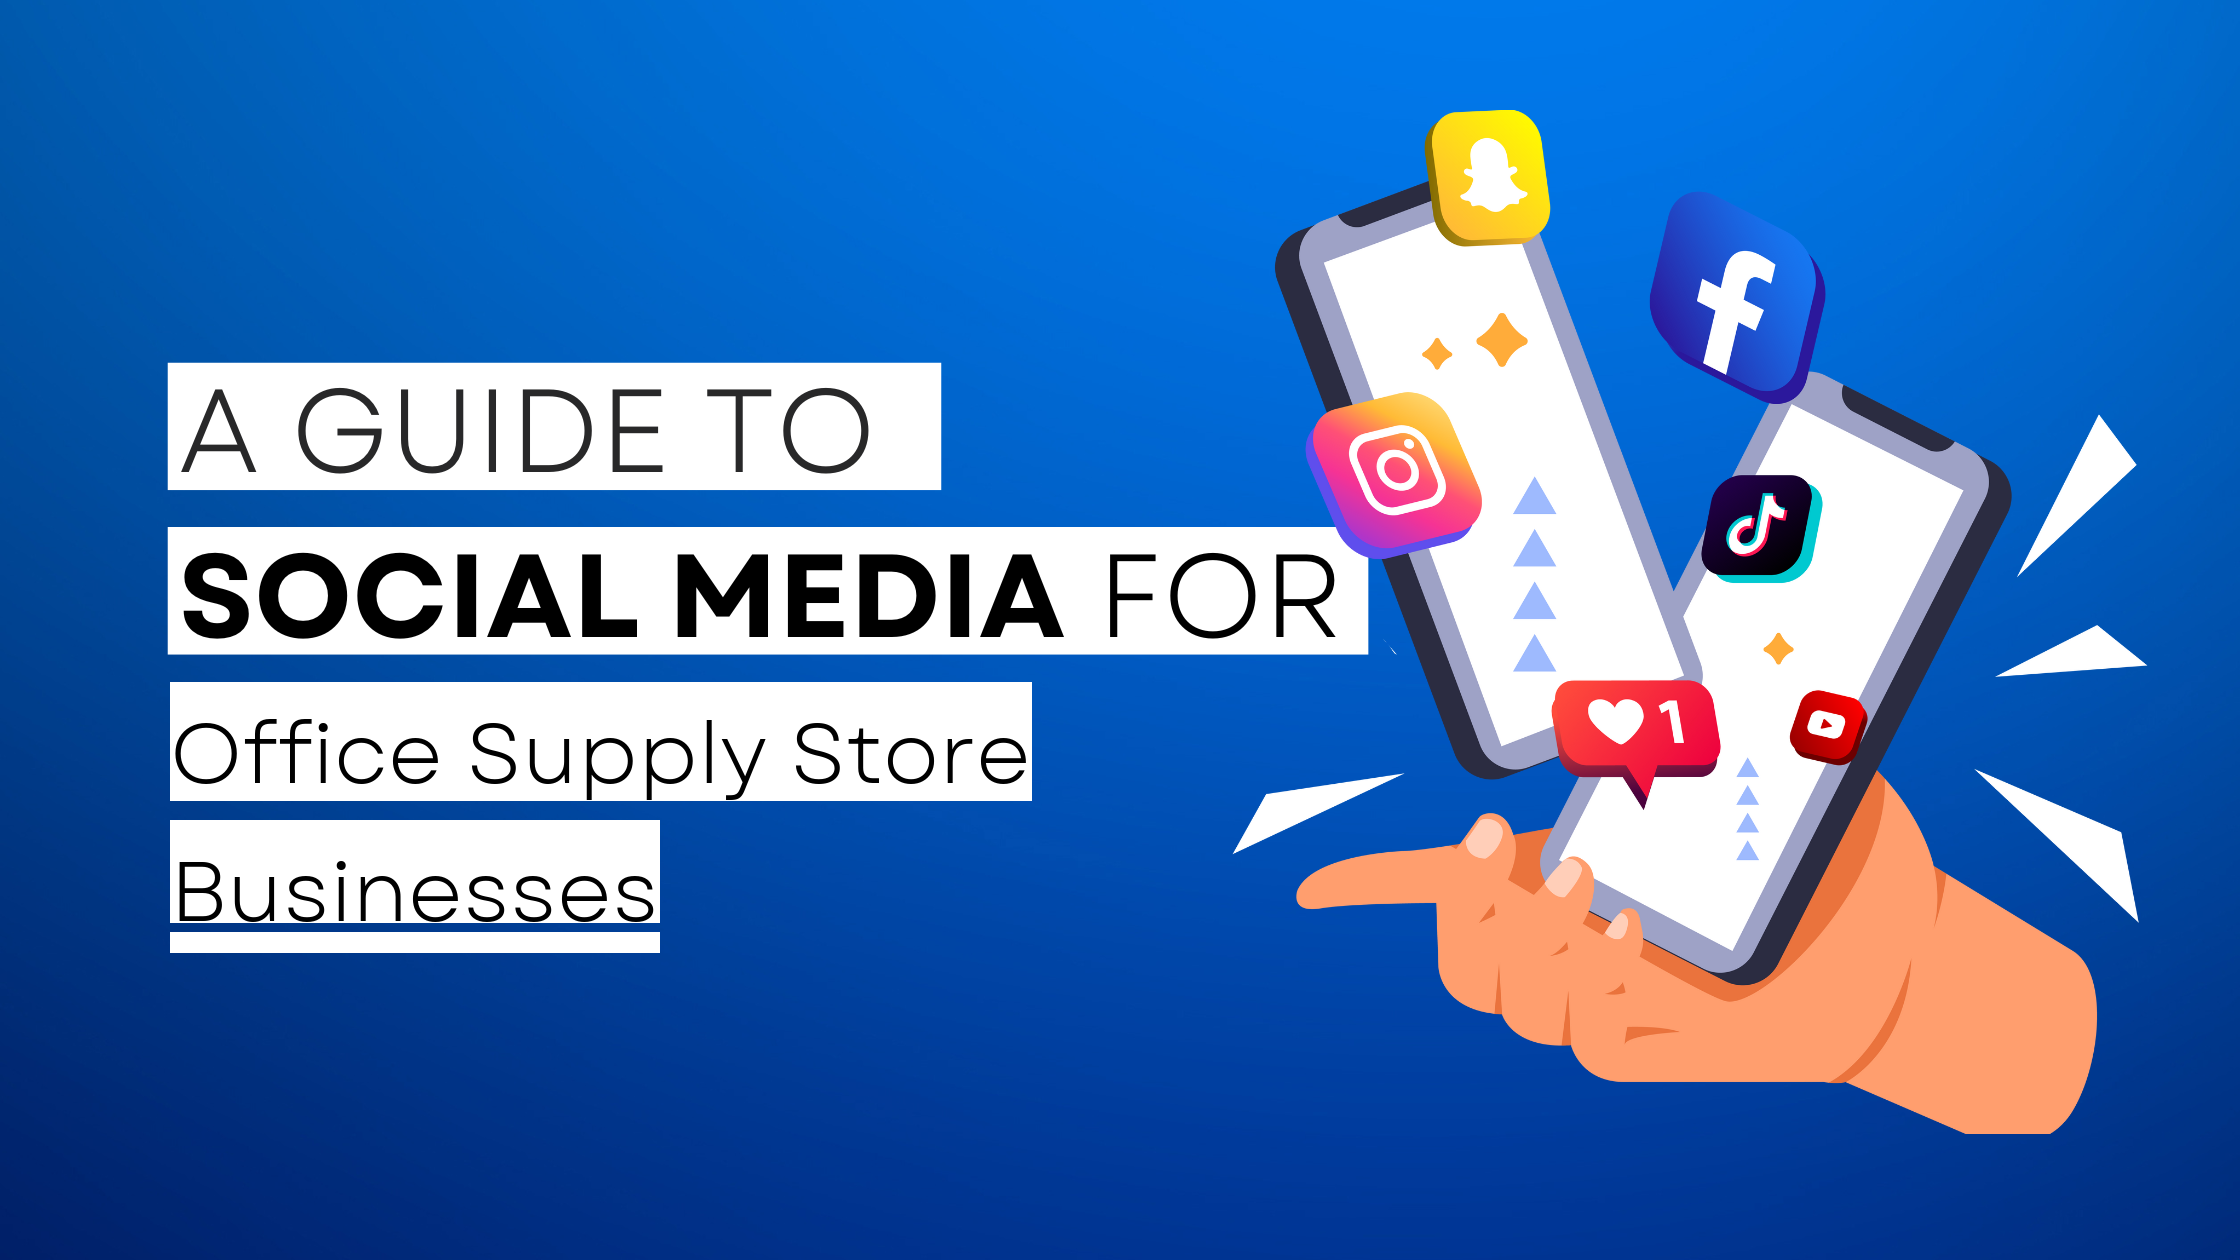 How to start Office Supply Store  on social media